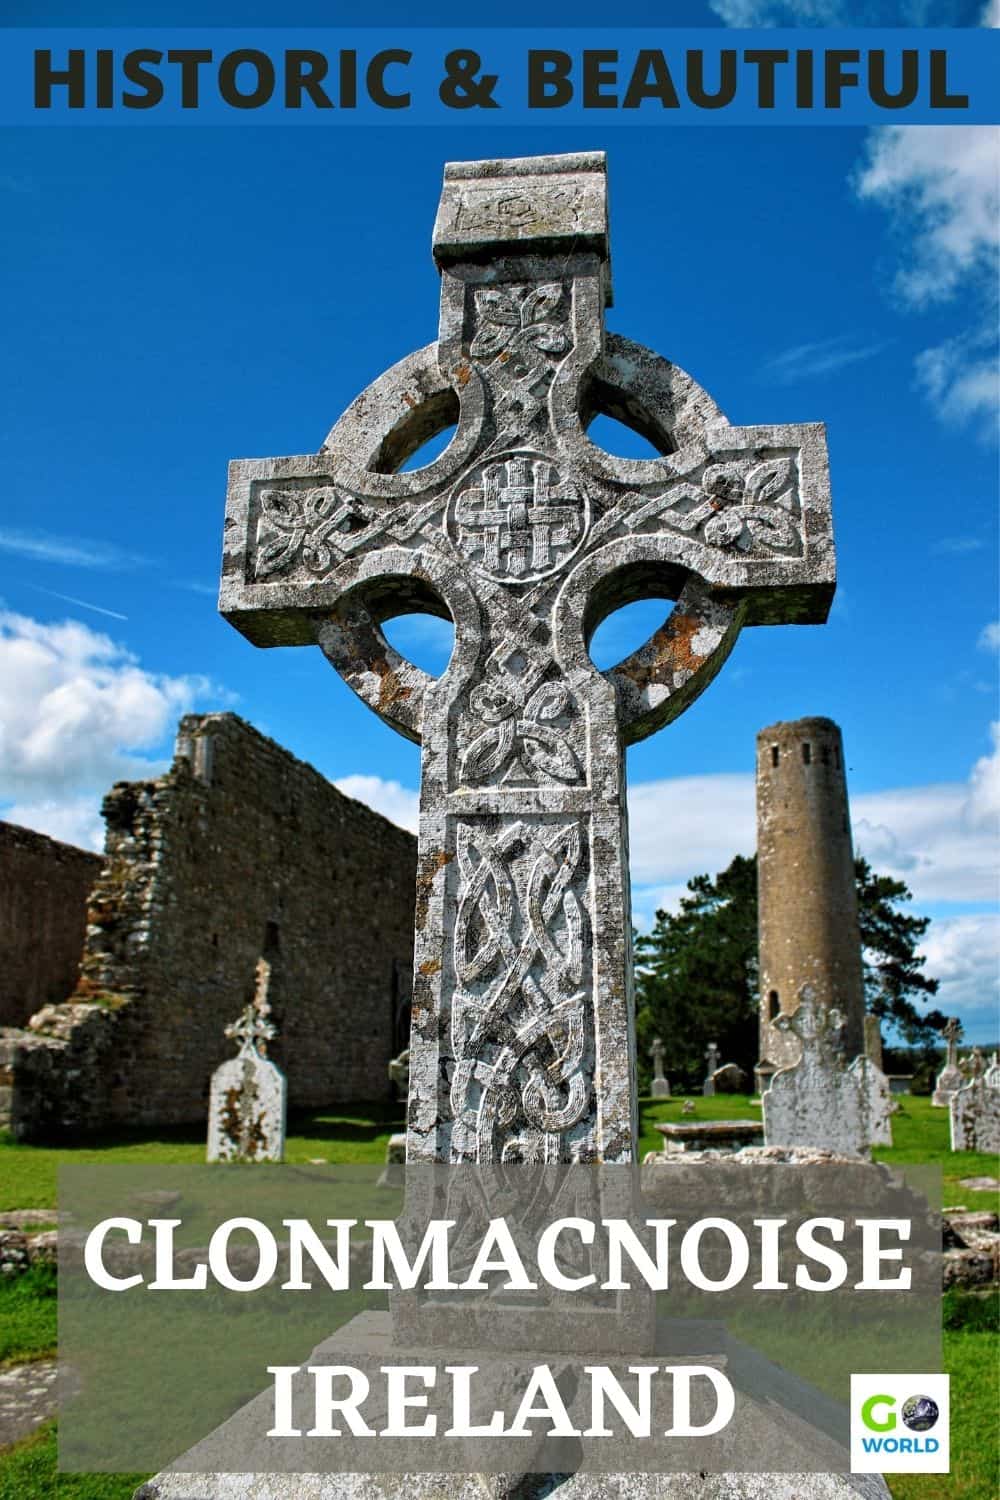 Clonmacnoise is in Offaly, Ireland. Learn about the interesting history of the Clonmacnoise monastery and what to expect when you visit today. #travelireland #historicireland #clonmacnoiseireland